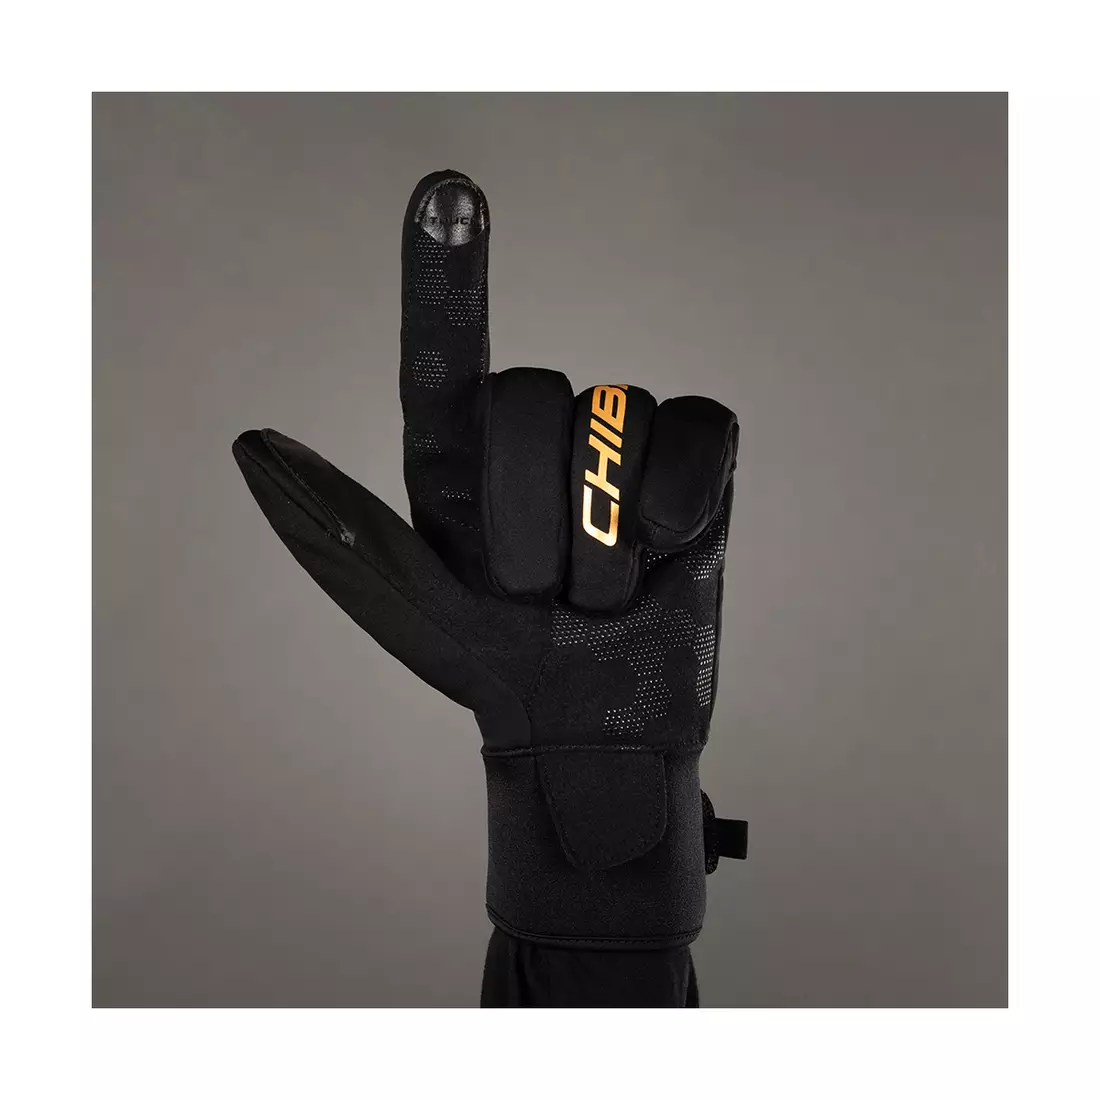 CHIBA CLASSIC warm winter bicycle gloves, black/gold